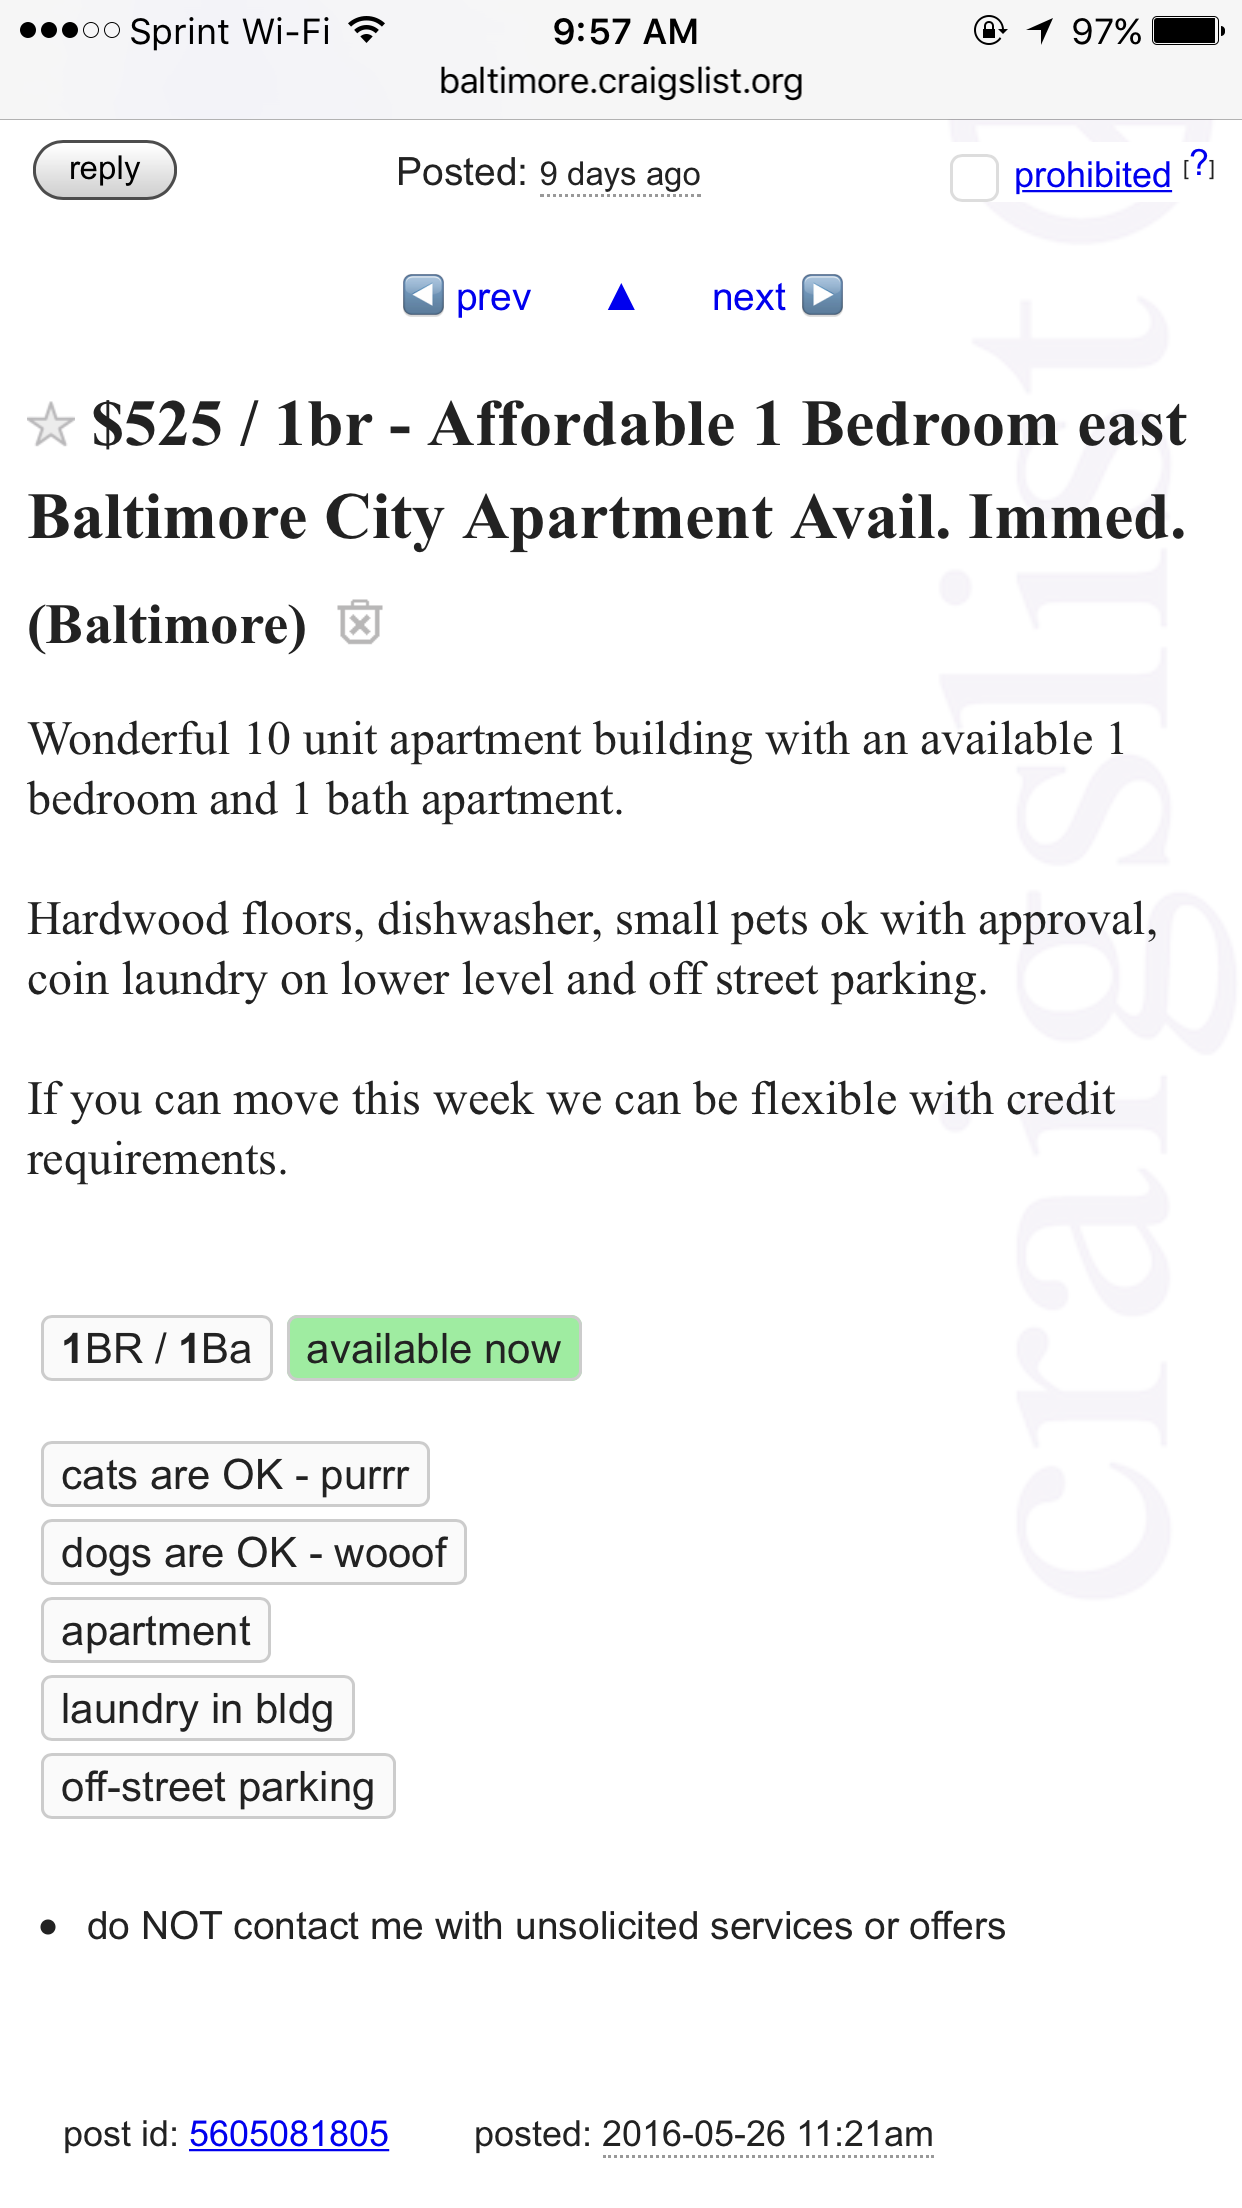 This is one of their ads on craiglist